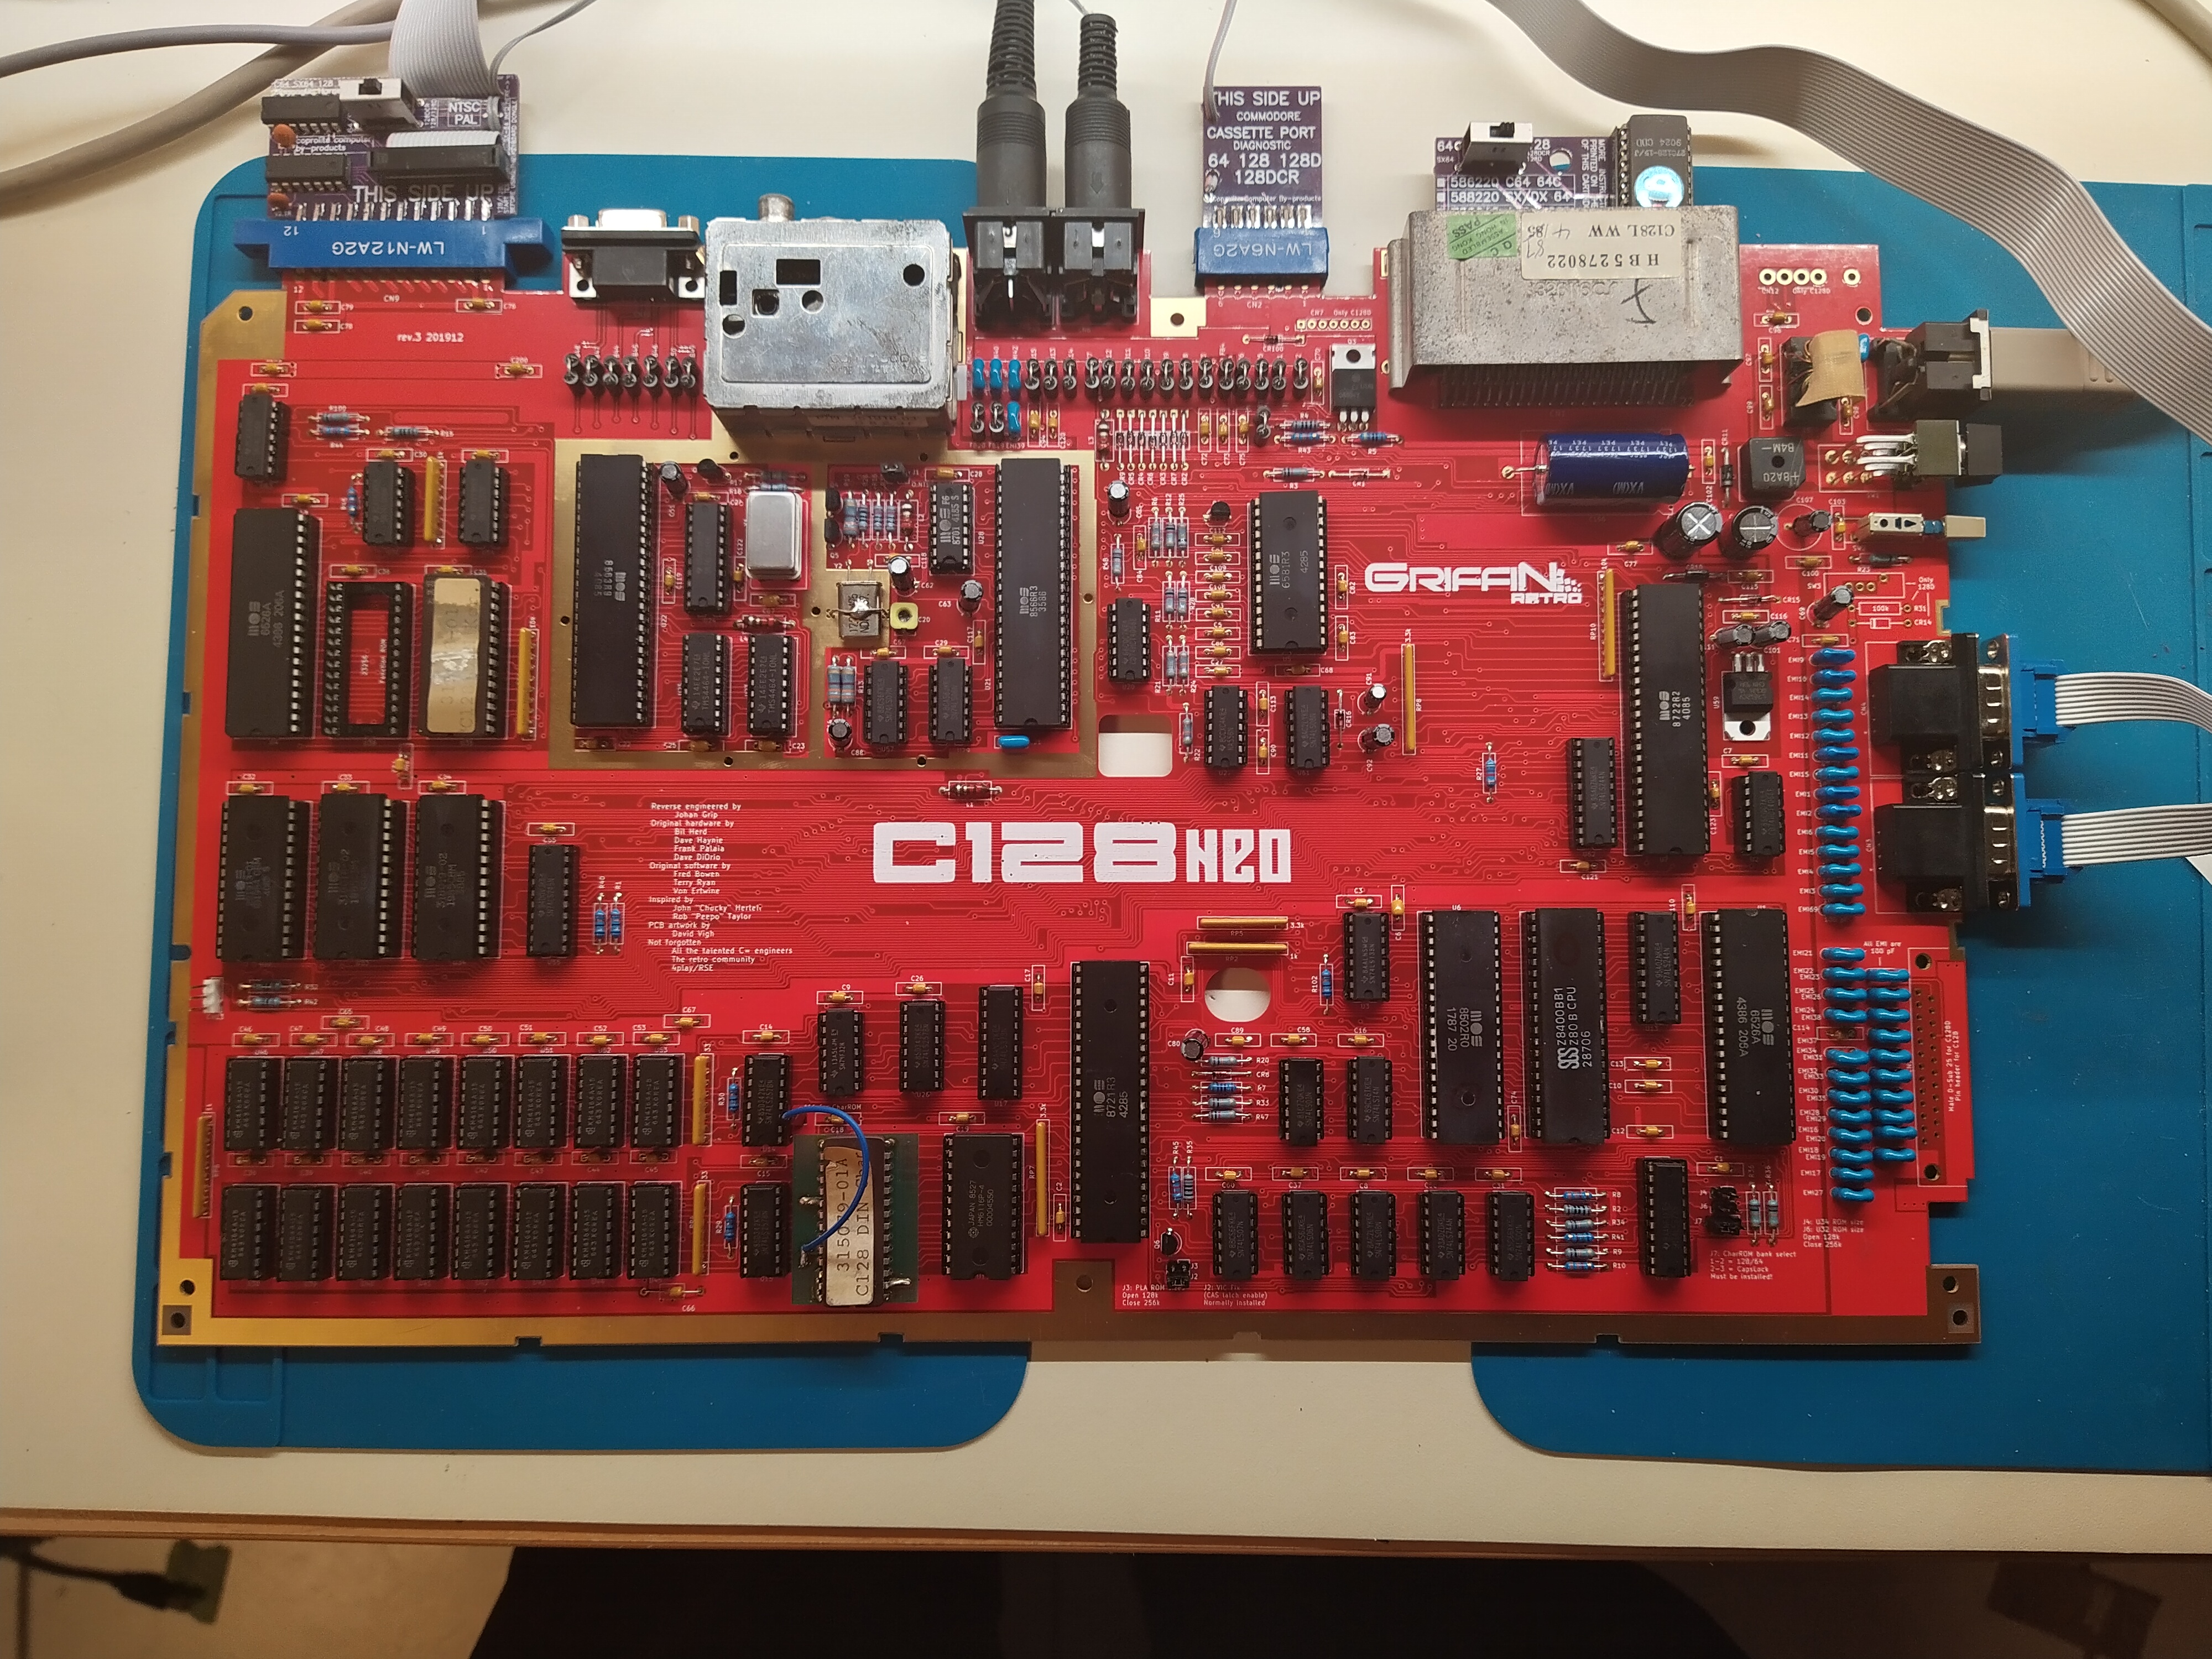 An assmebled revision 3 board